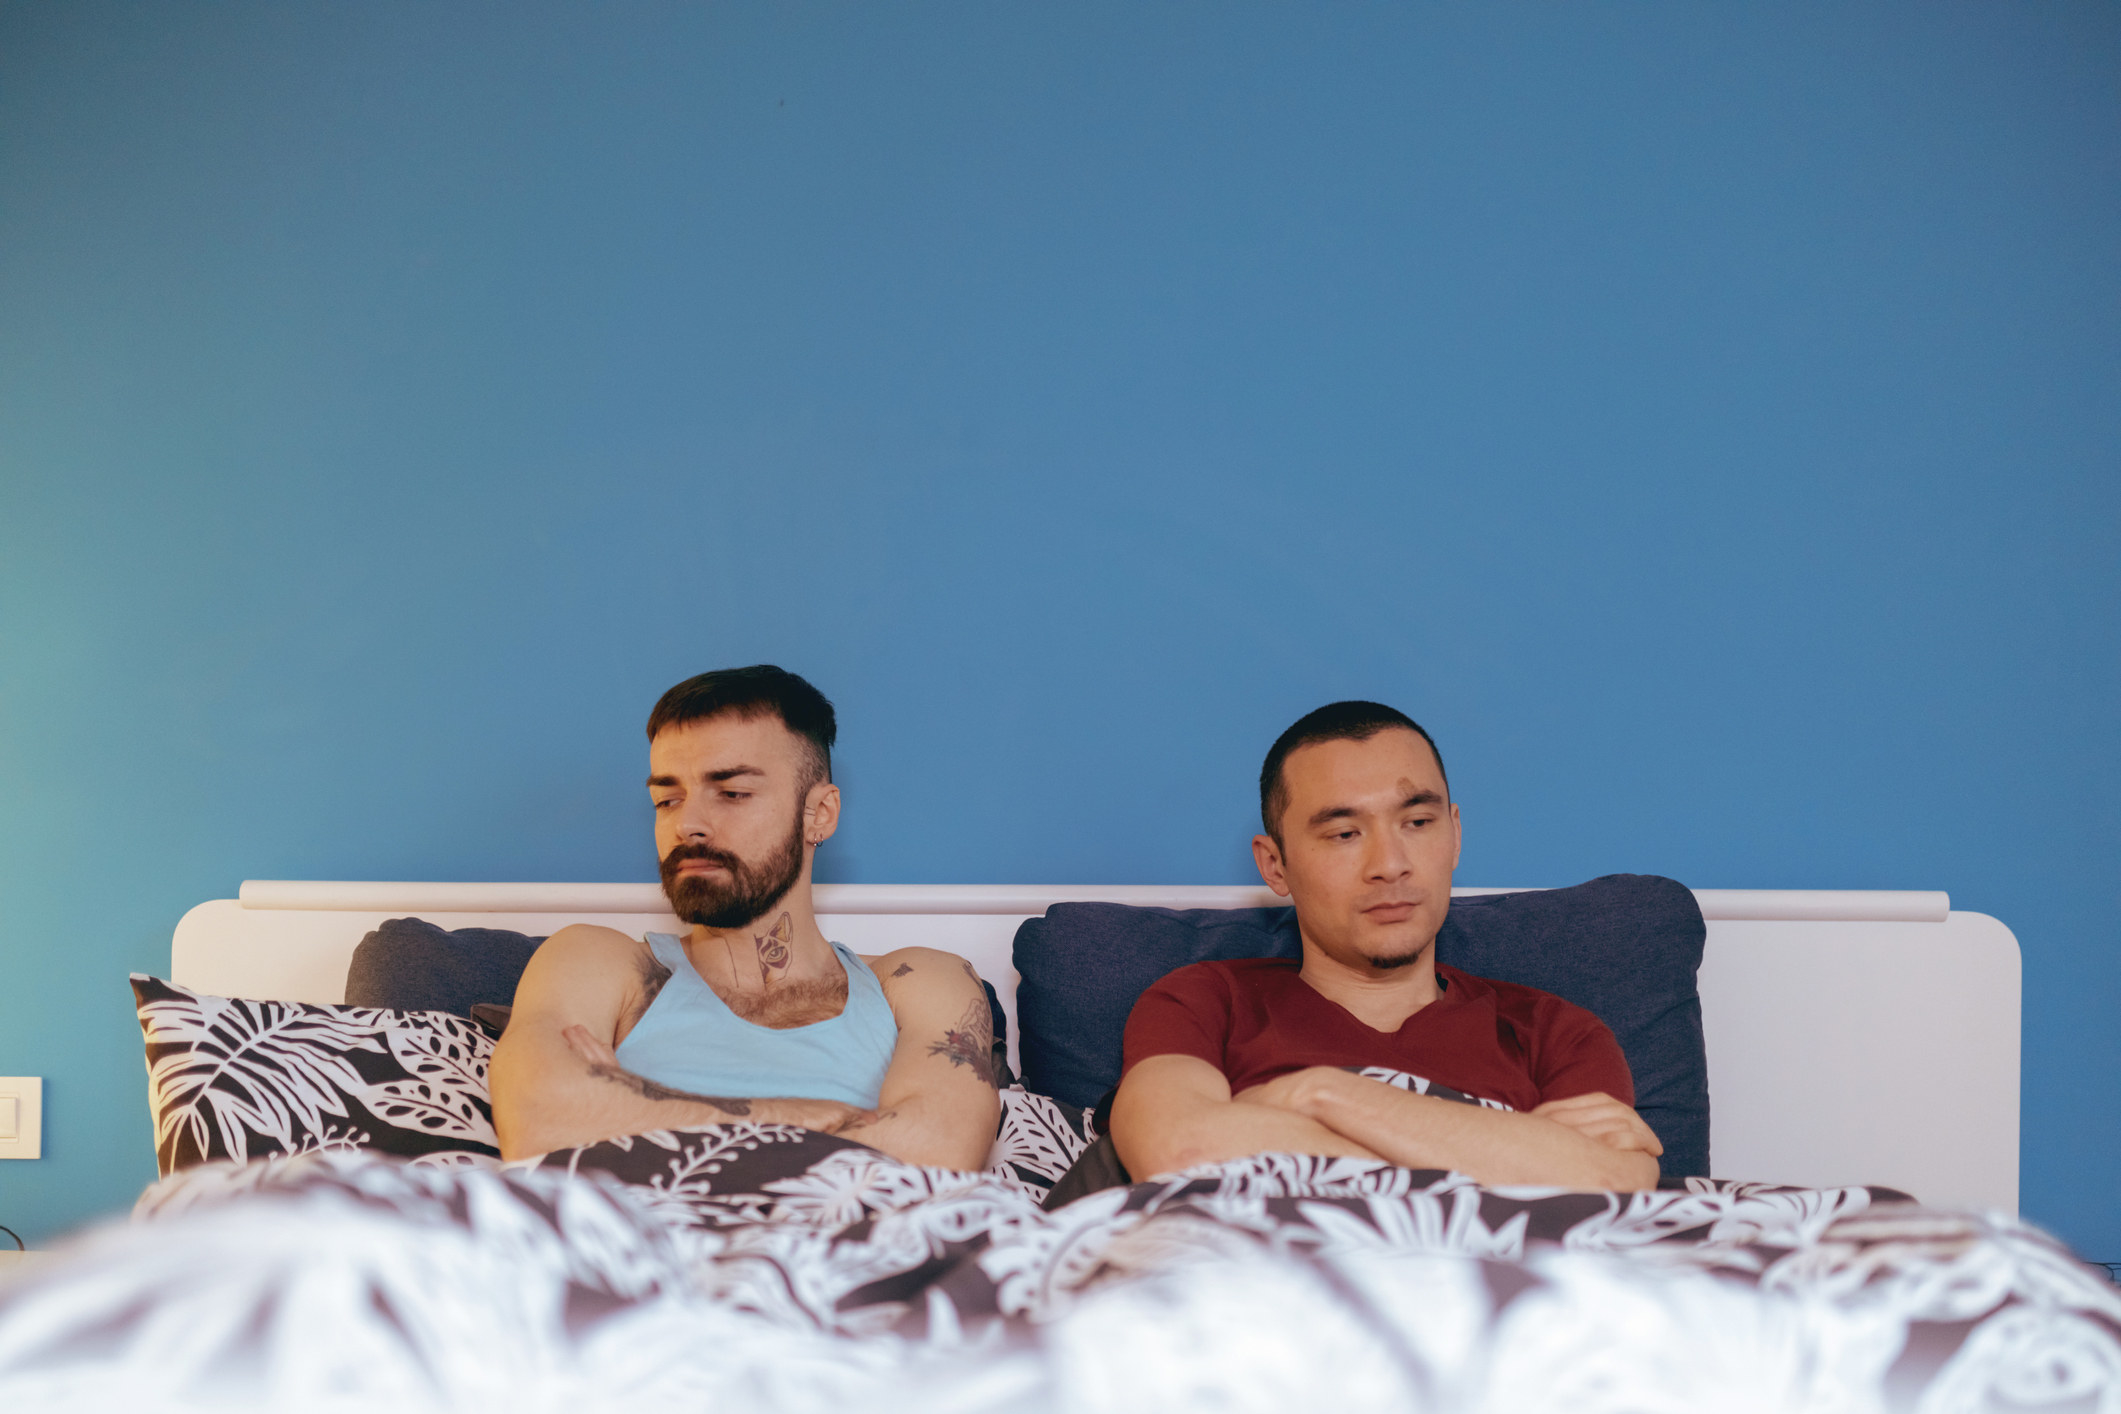 Displeased gay couple sitting in bed under the sheets with arms crossed after an argument